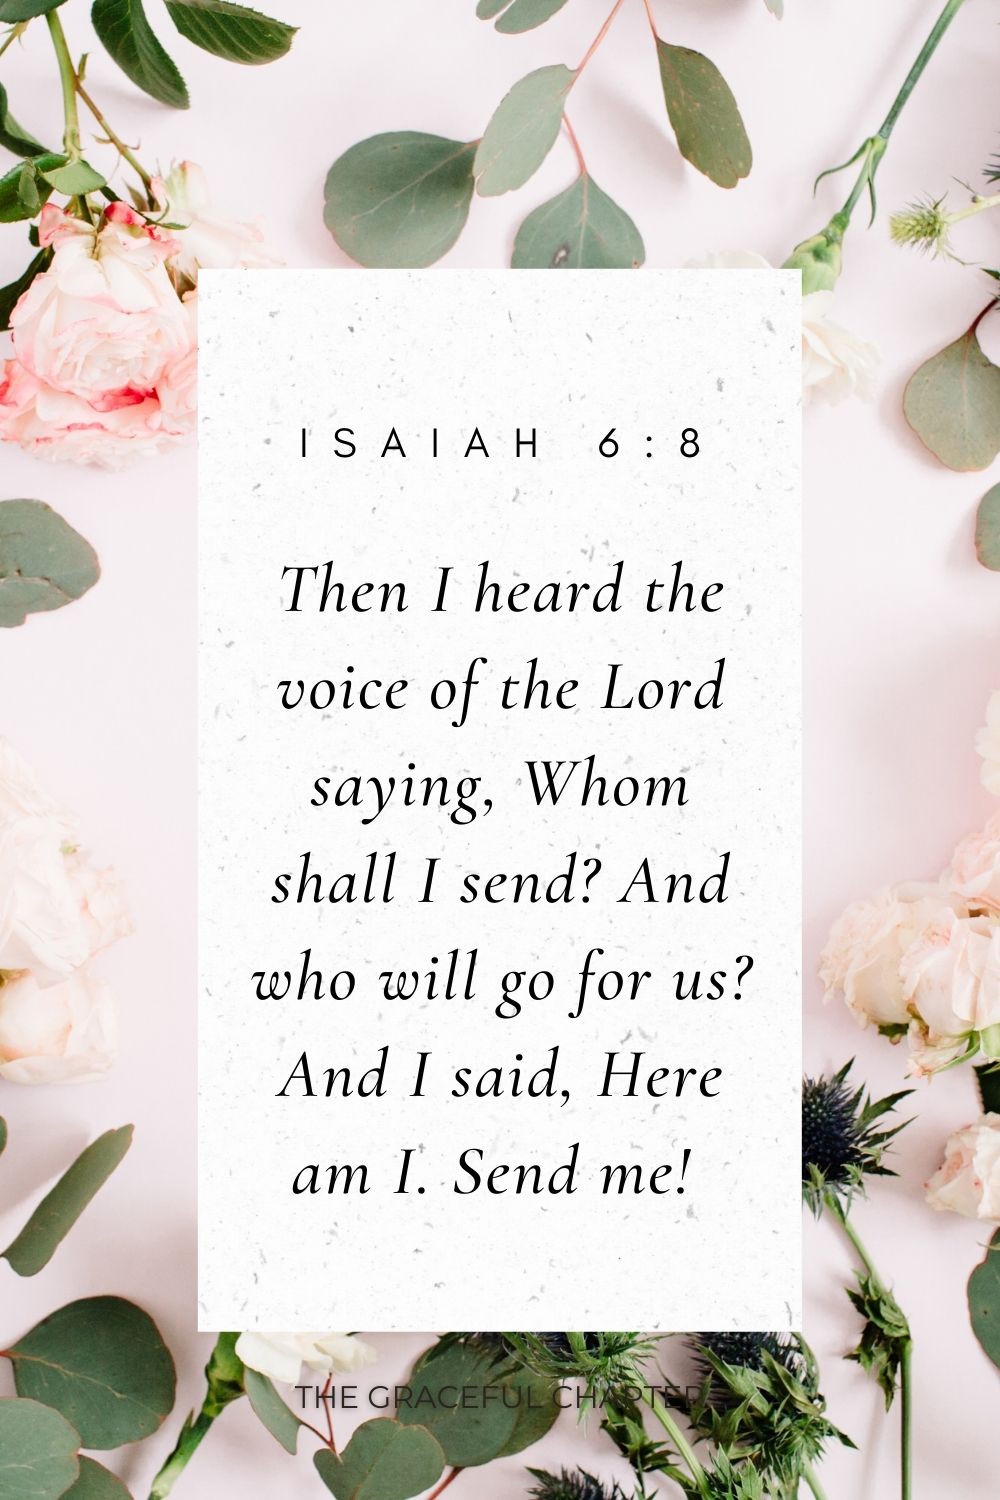 Then I heard the voice of the Lord saying, Whom shall I send? And who will go for us? And I said, Here am I. Send me!  Isaiah 6:8